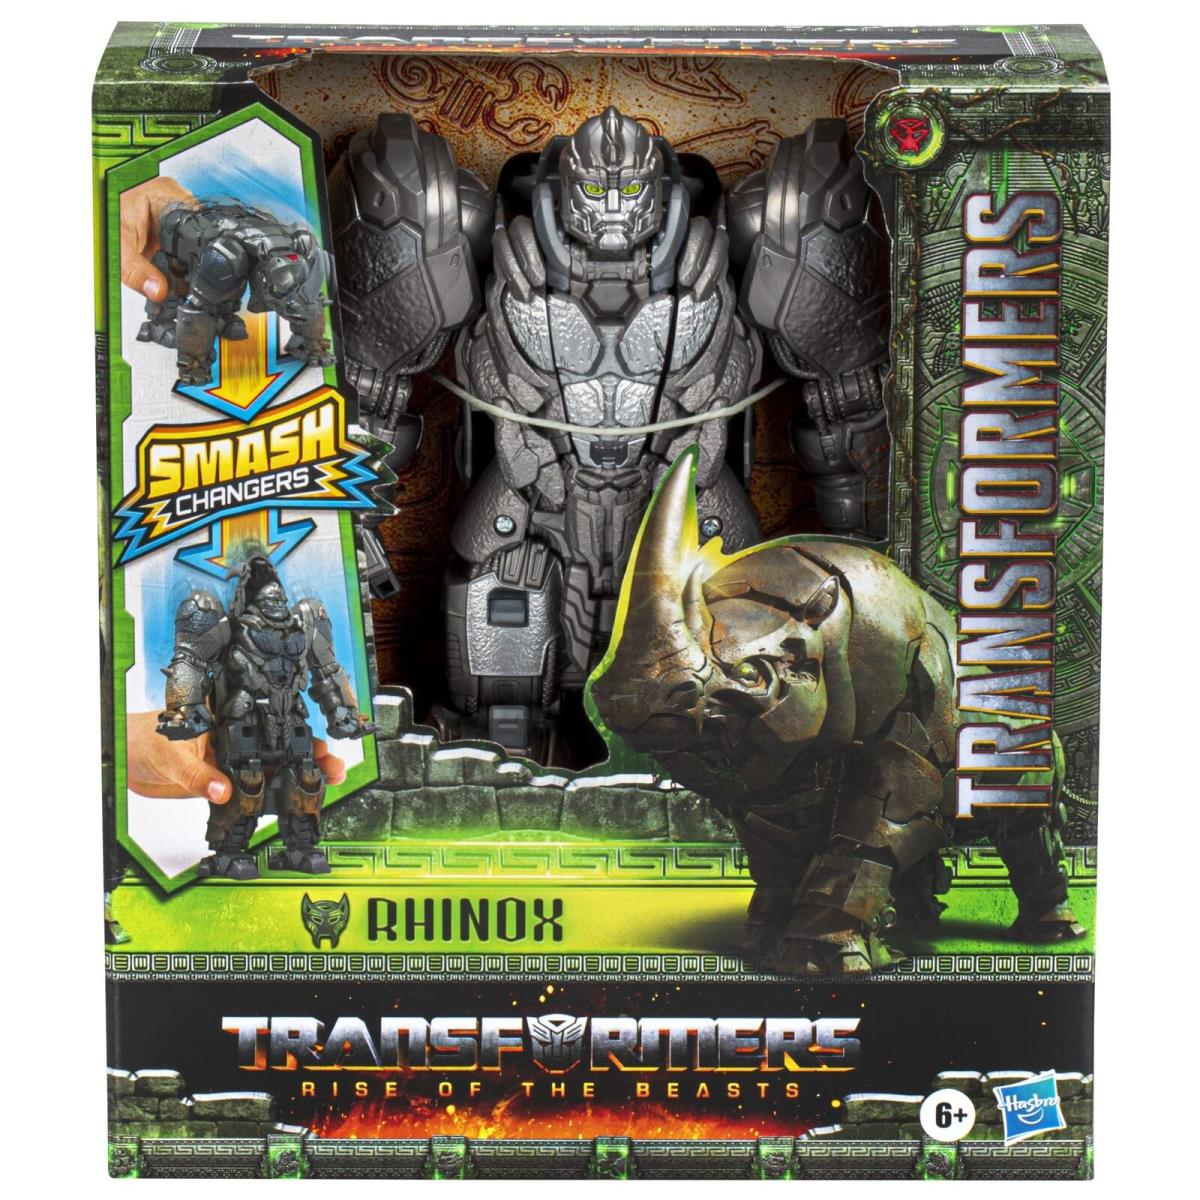 Toys Rise of The Beasts Movie Smash Changer Rhinox Converting Action Figure